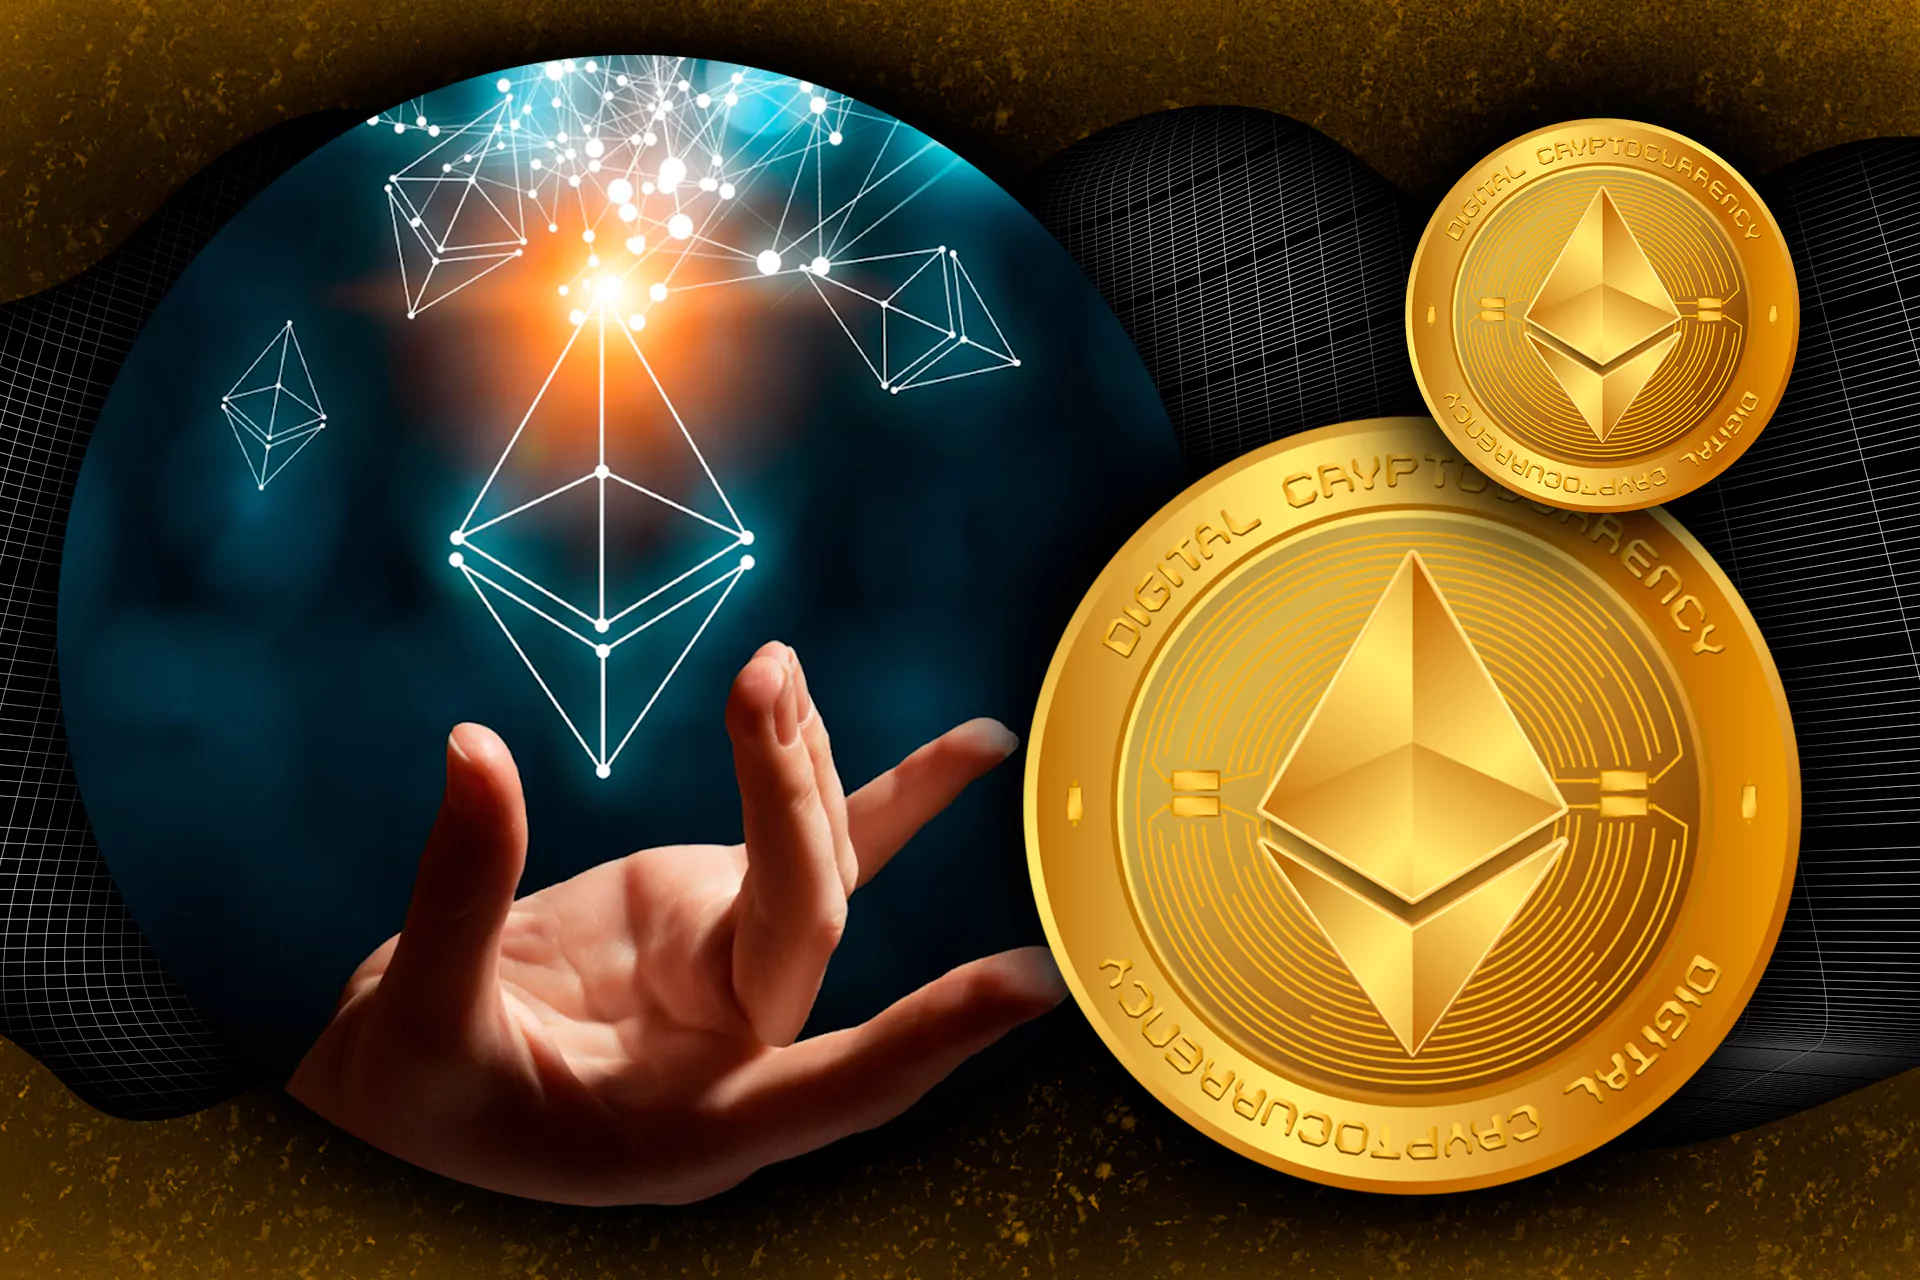 Another popular cryptocurrency - ethereum.